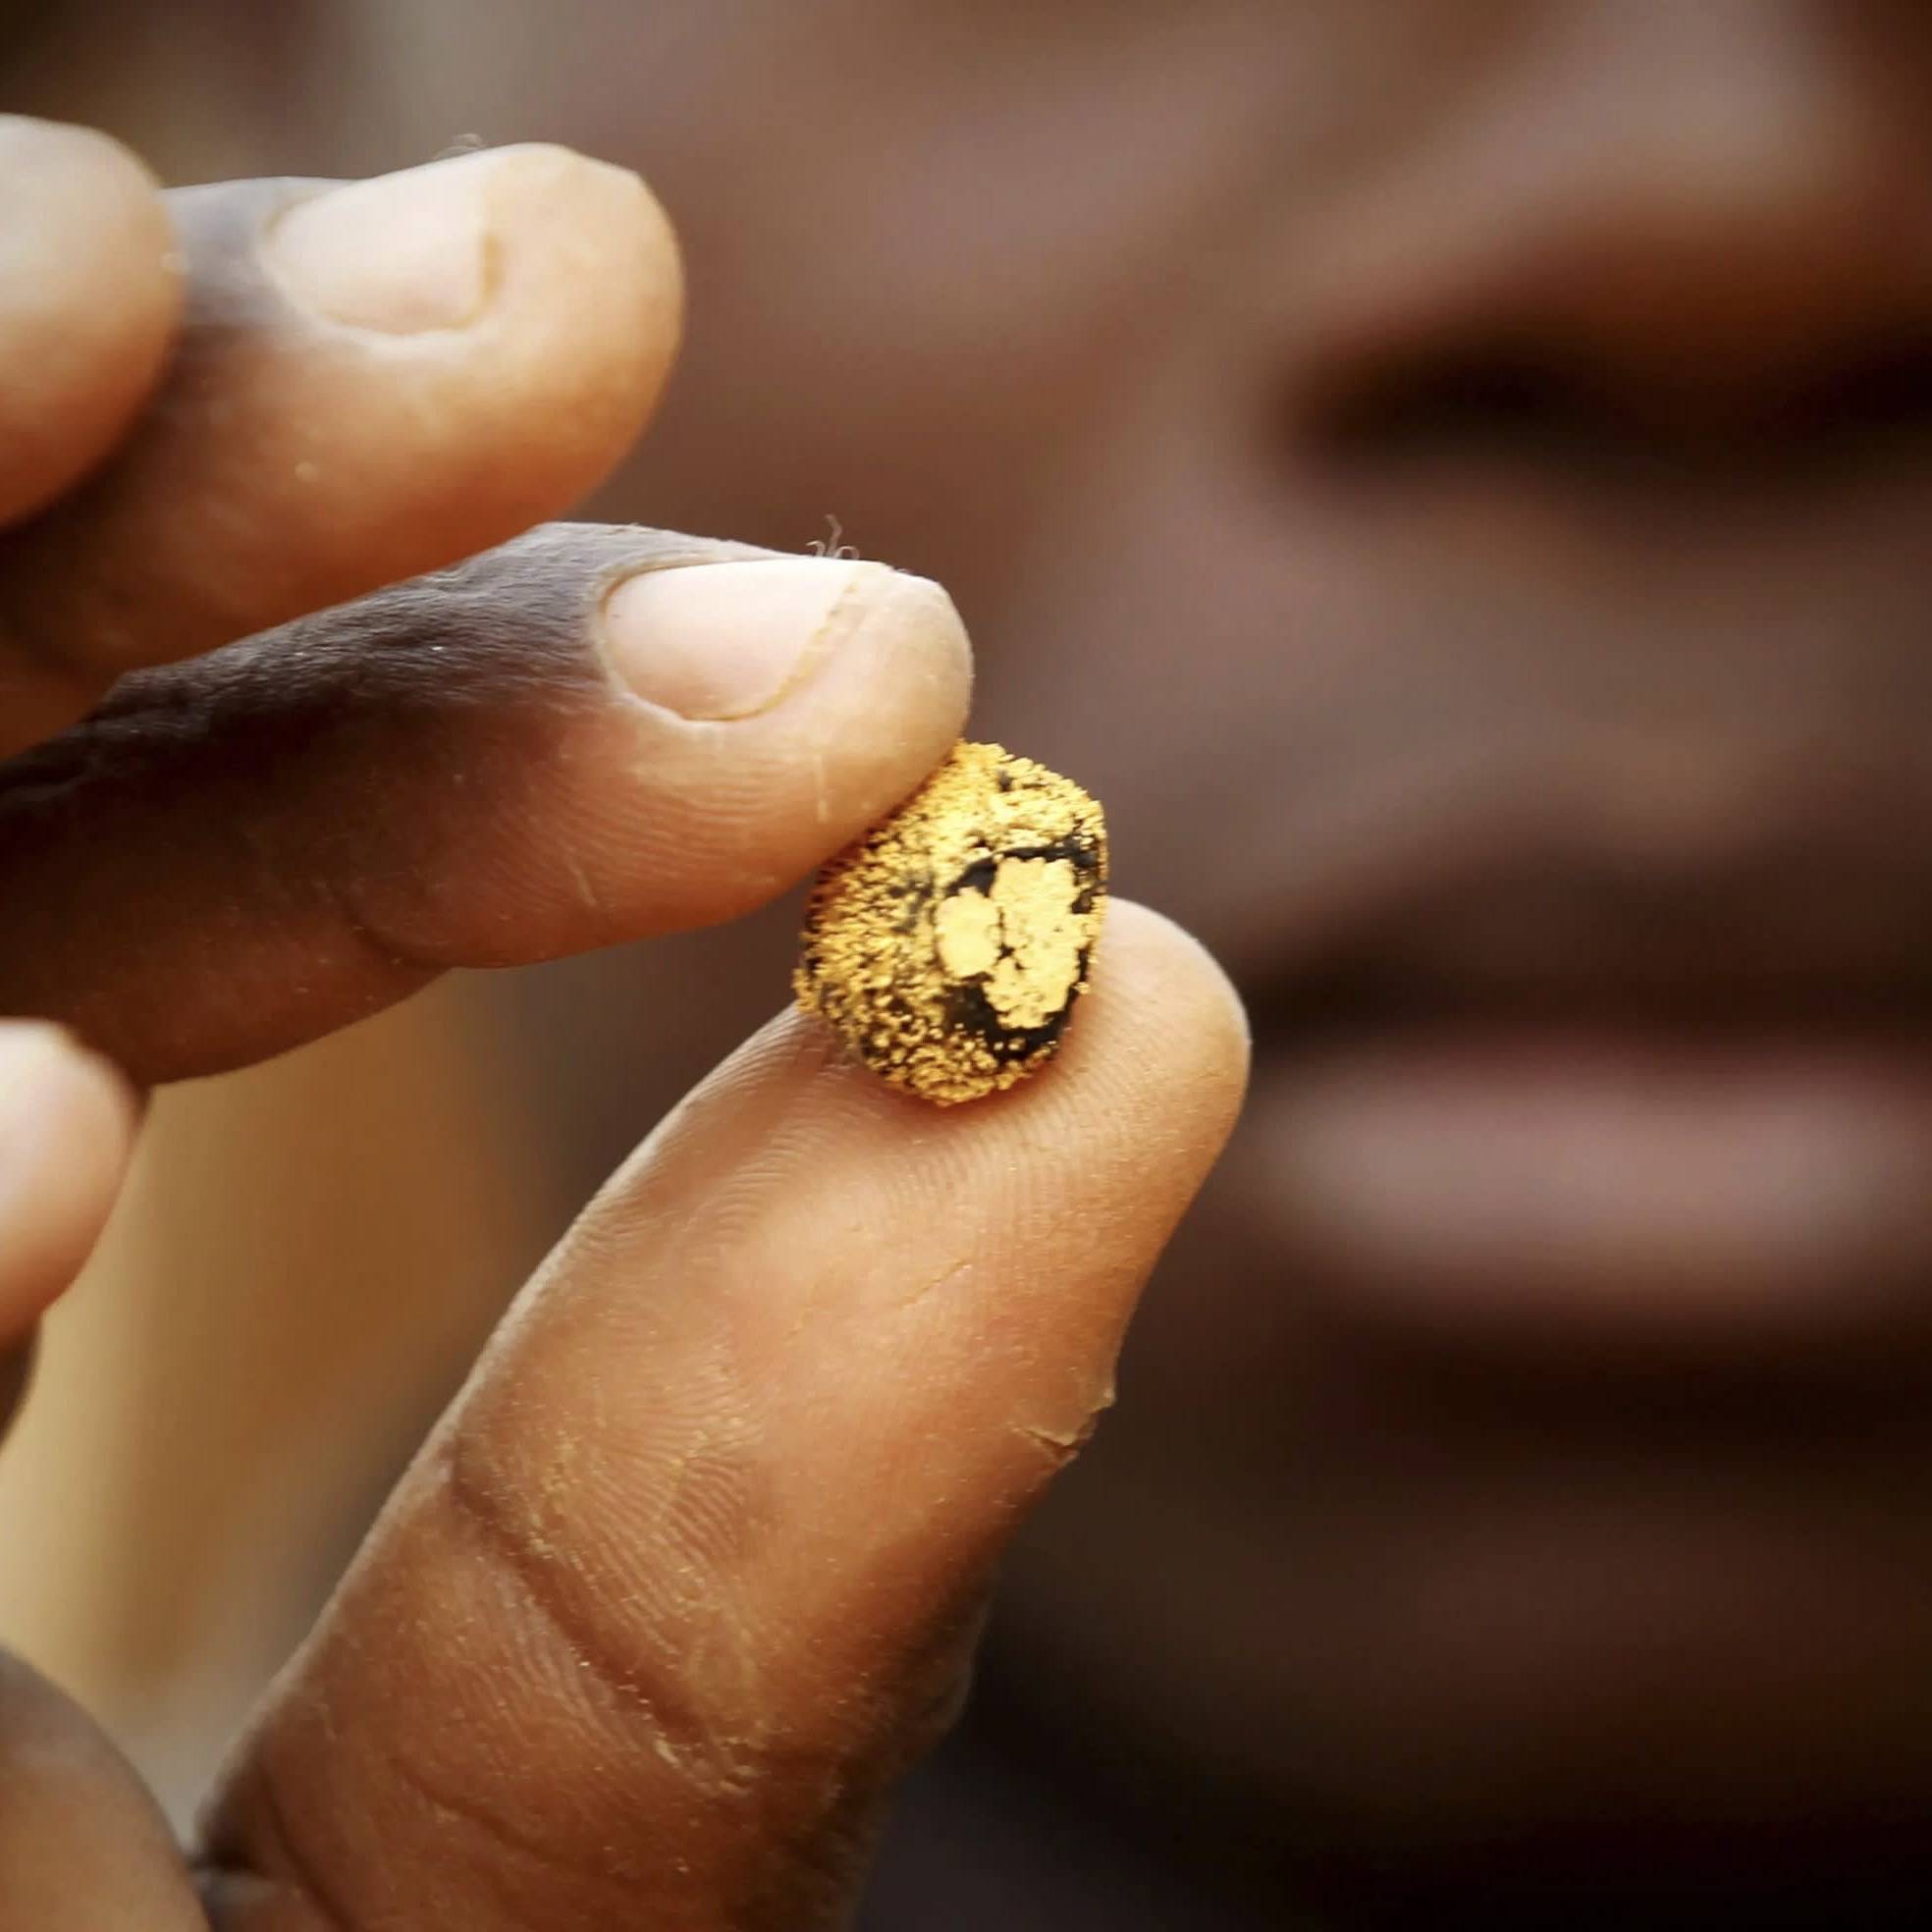 Chinese residing in Ghana may be making off with the country's gold